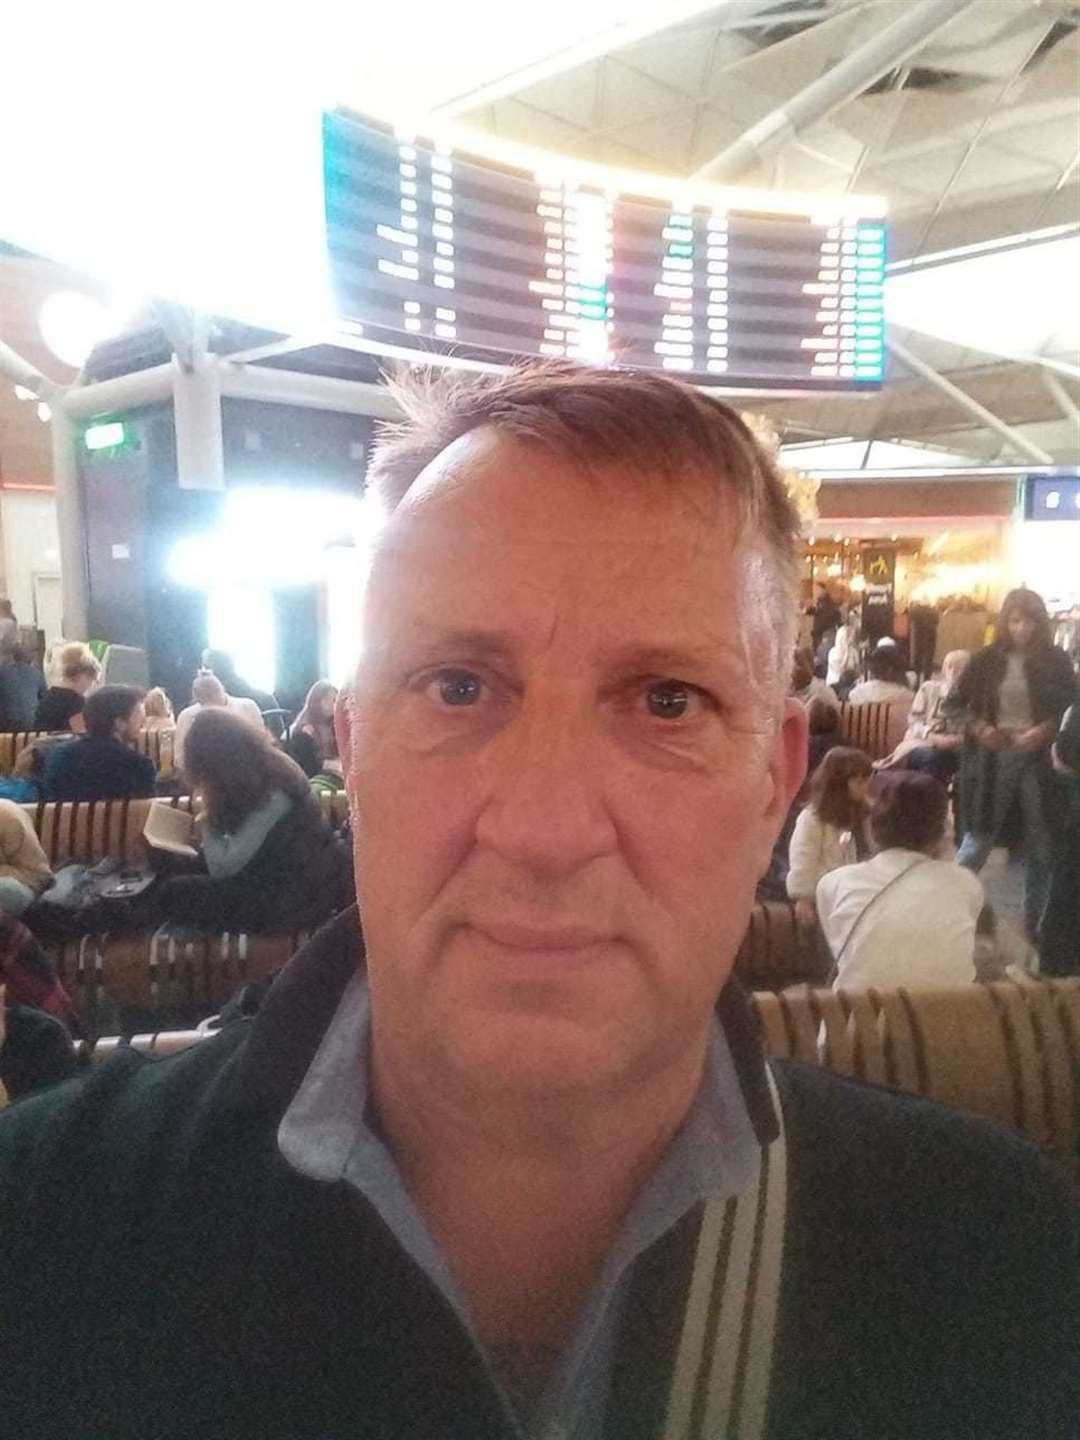 Chris Armstrong, from Wainscott, Rochester, missed his flight to Dubai yesterday due to the major delays on the road caused by the Just Stop Oil protestors at the Dartford Crossing. Picture: Chris Armstrong